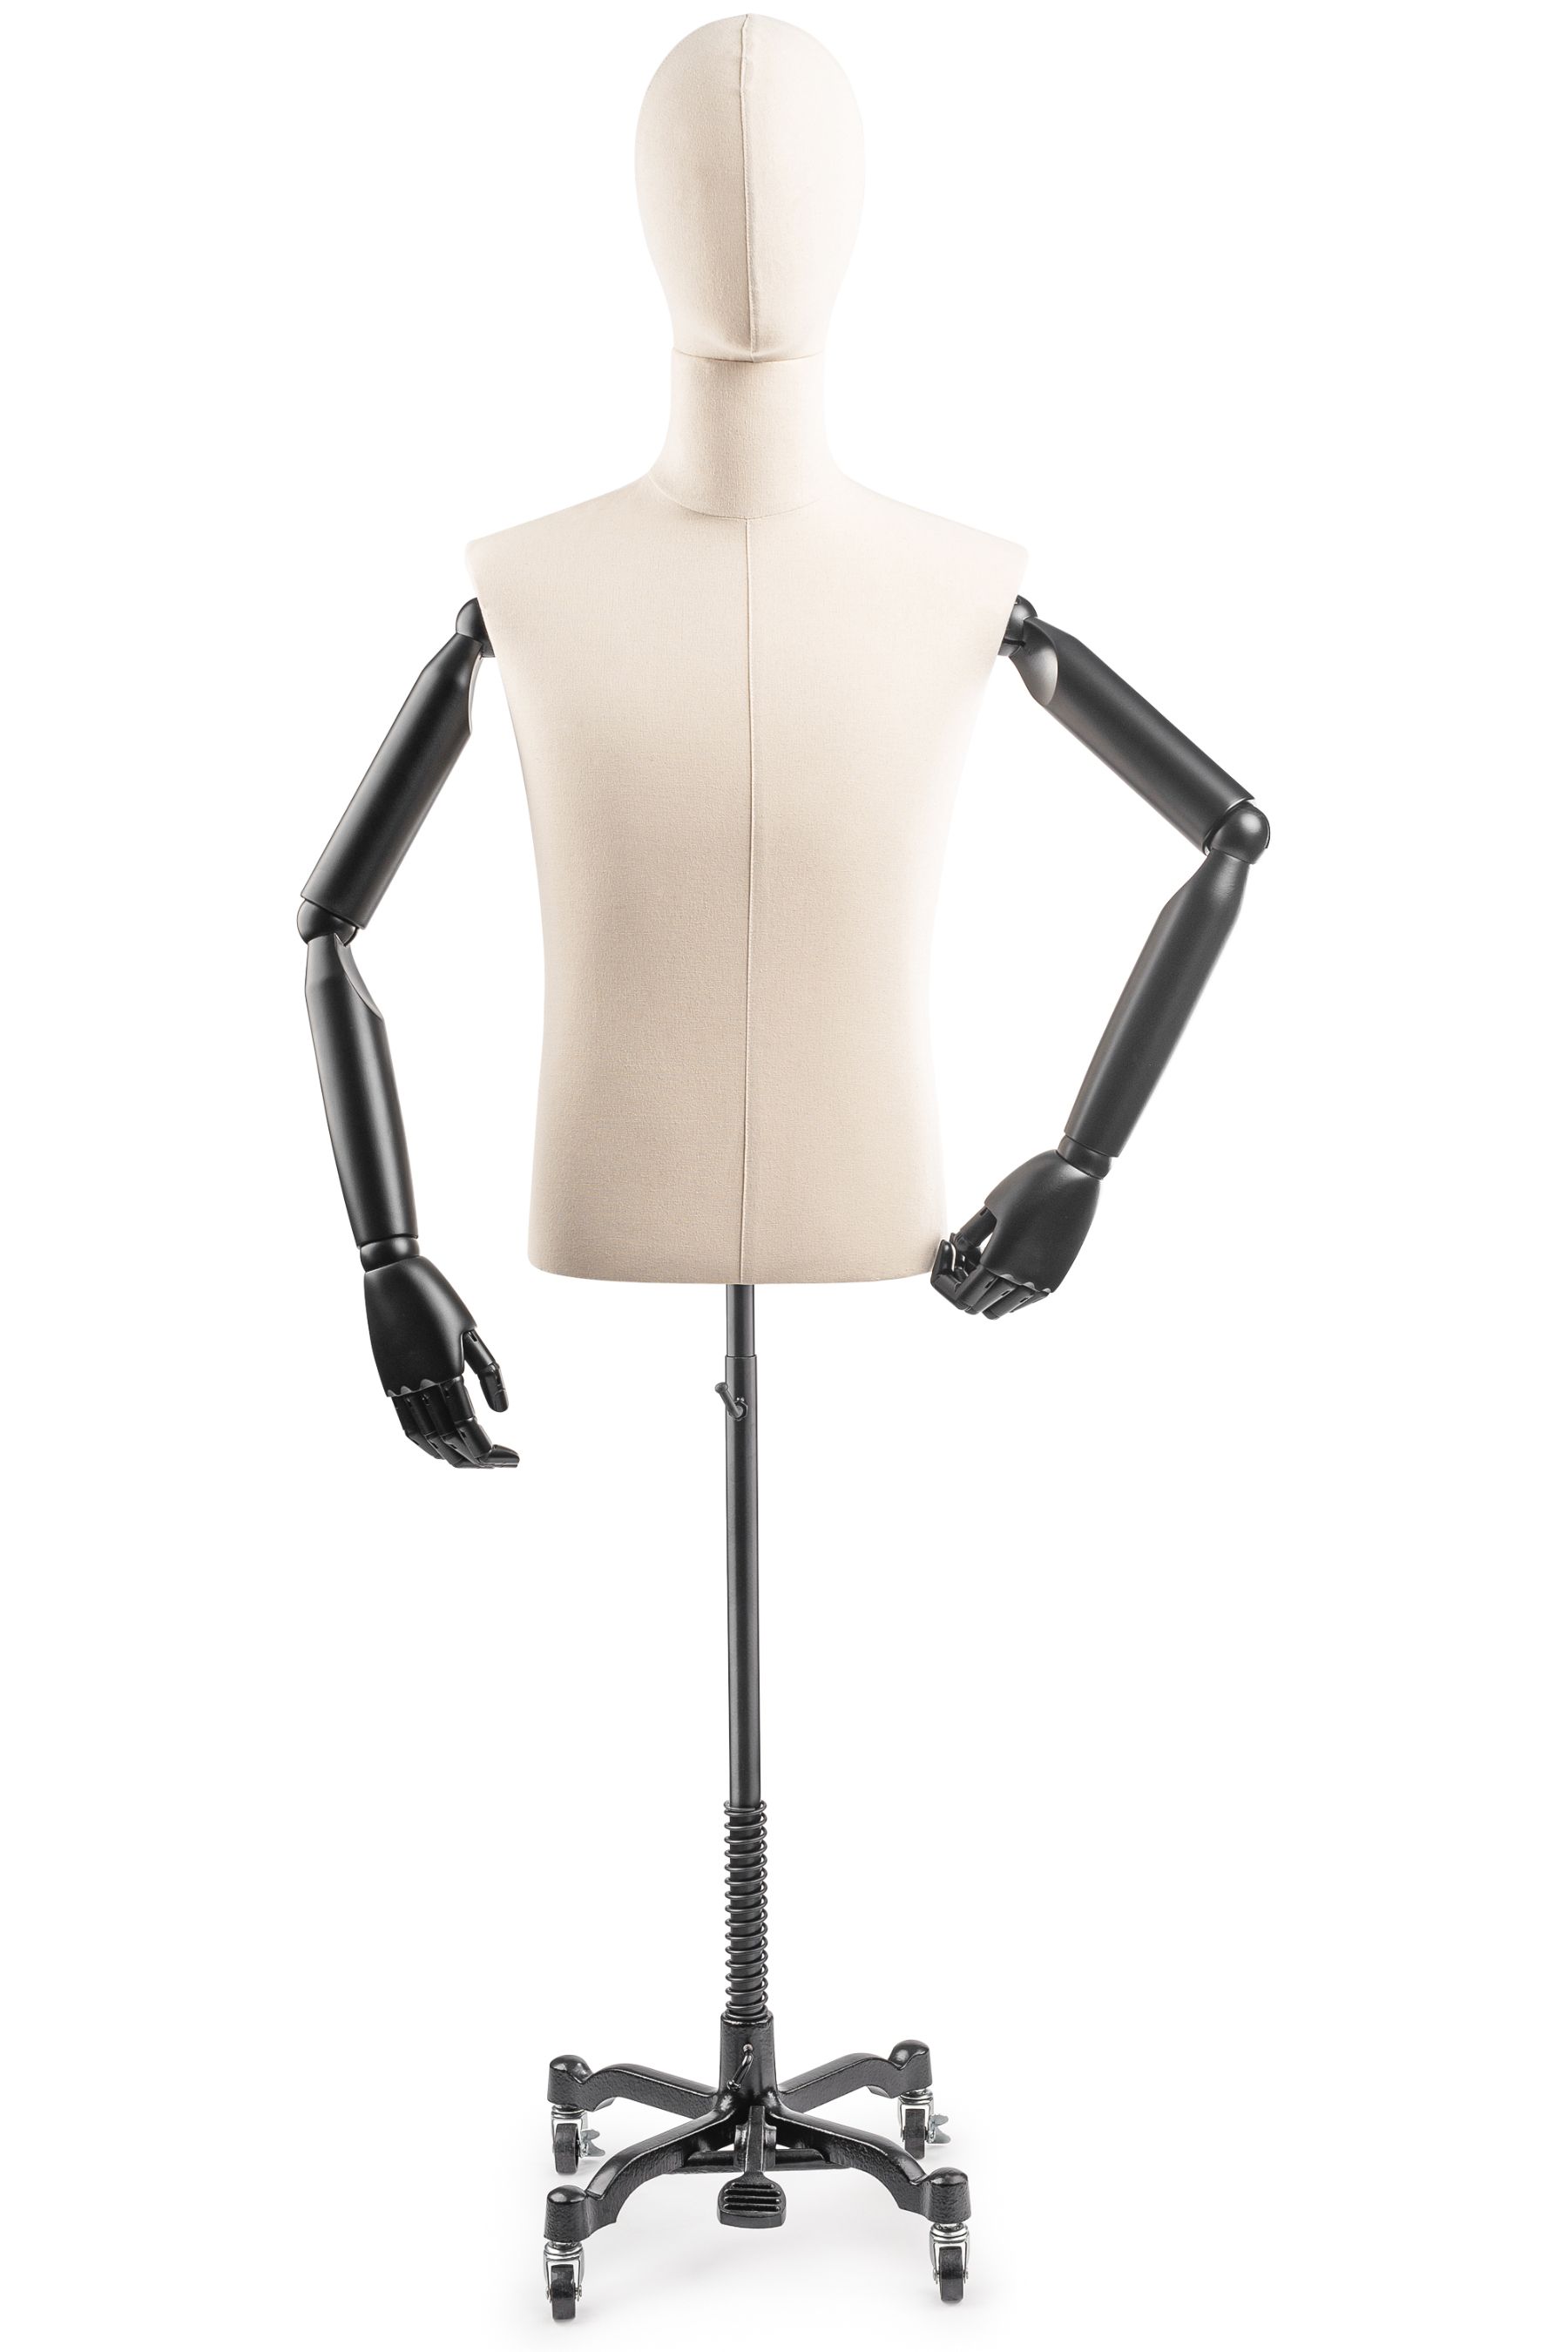 A mannequin sitting on top of a metal stand. Clothing mannequin